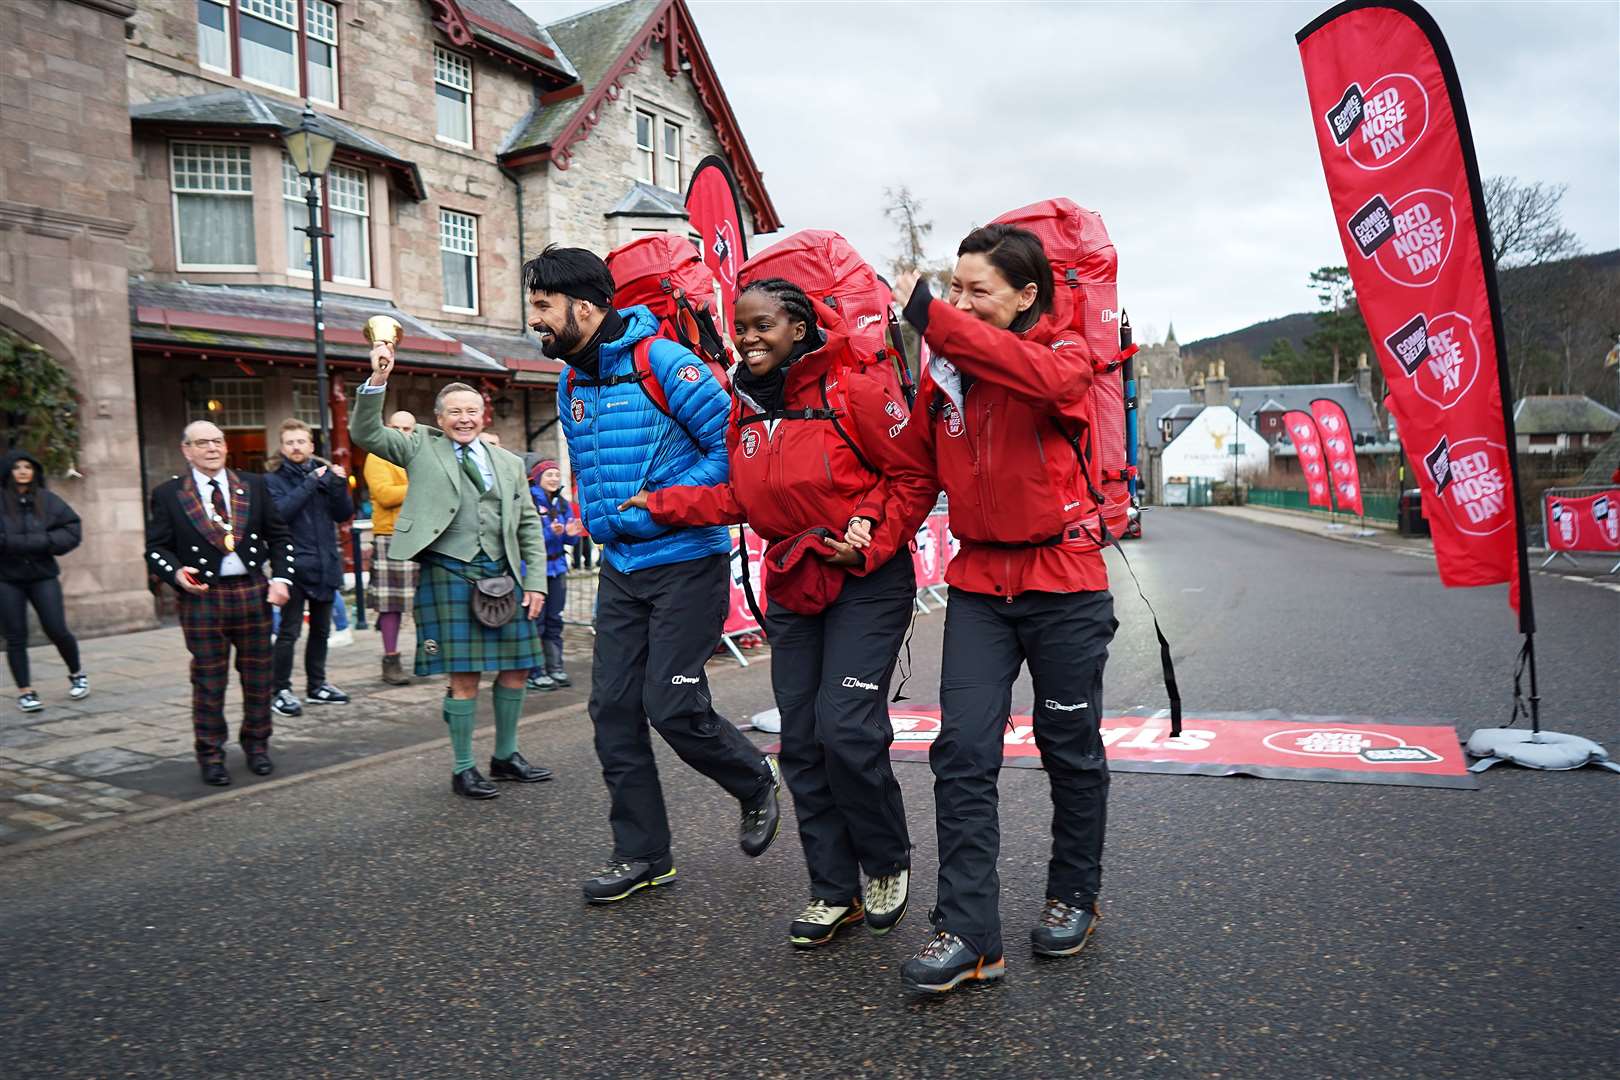 Setting off from Braemar. Photo by Hamish Frost/Comic Relief)